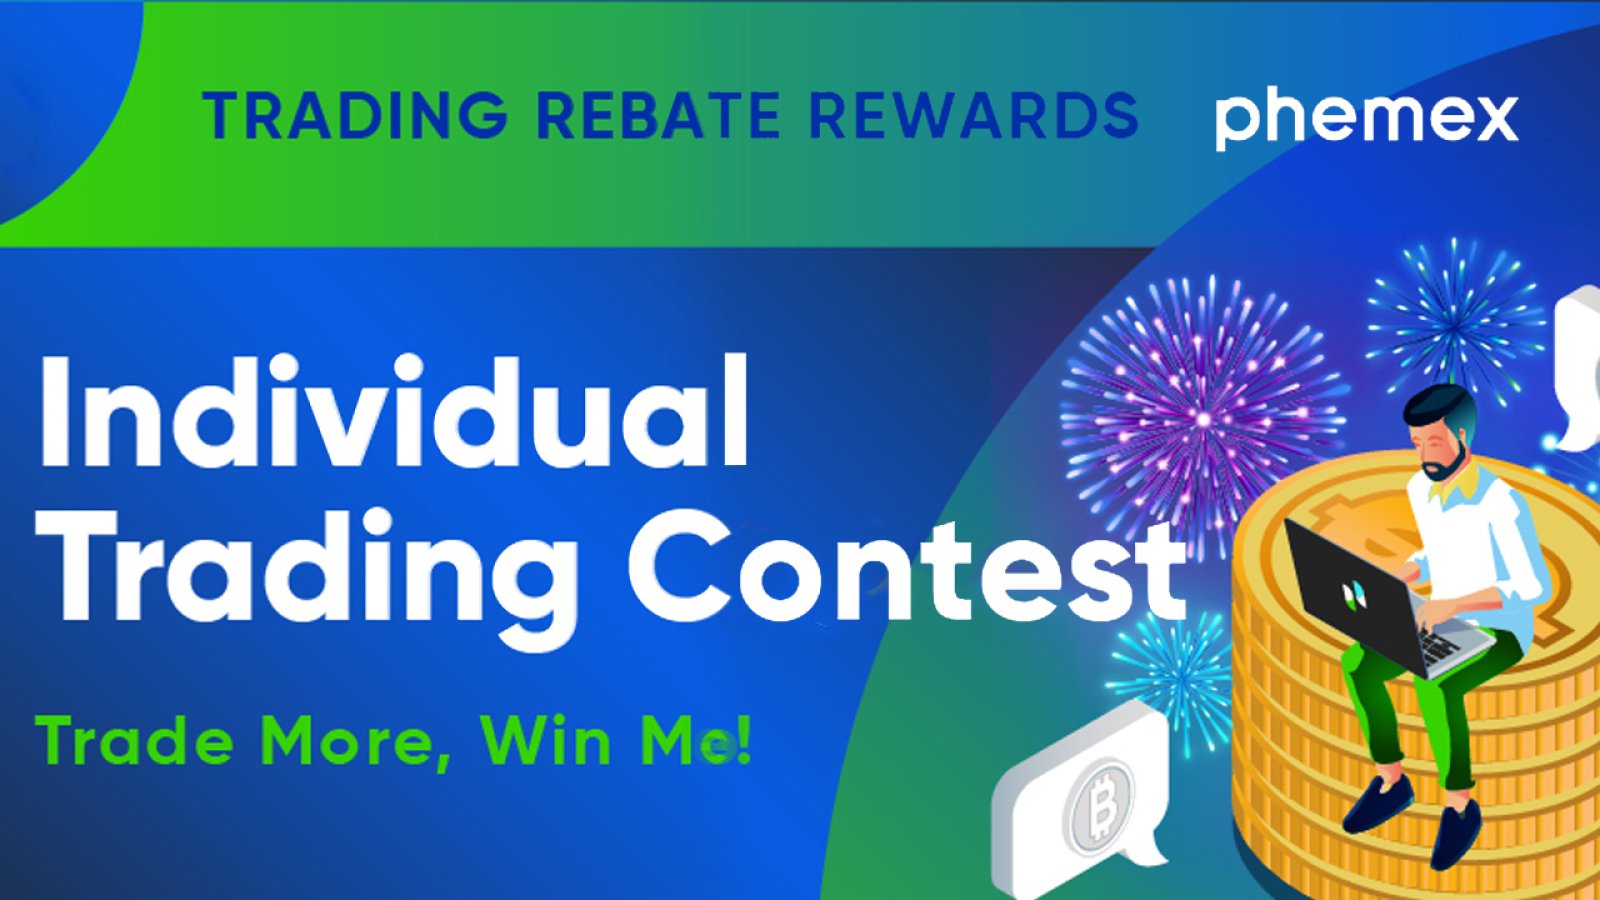 The Ultimate Trading Rebate Rewards by Phemex with $2 Million Prize Pool